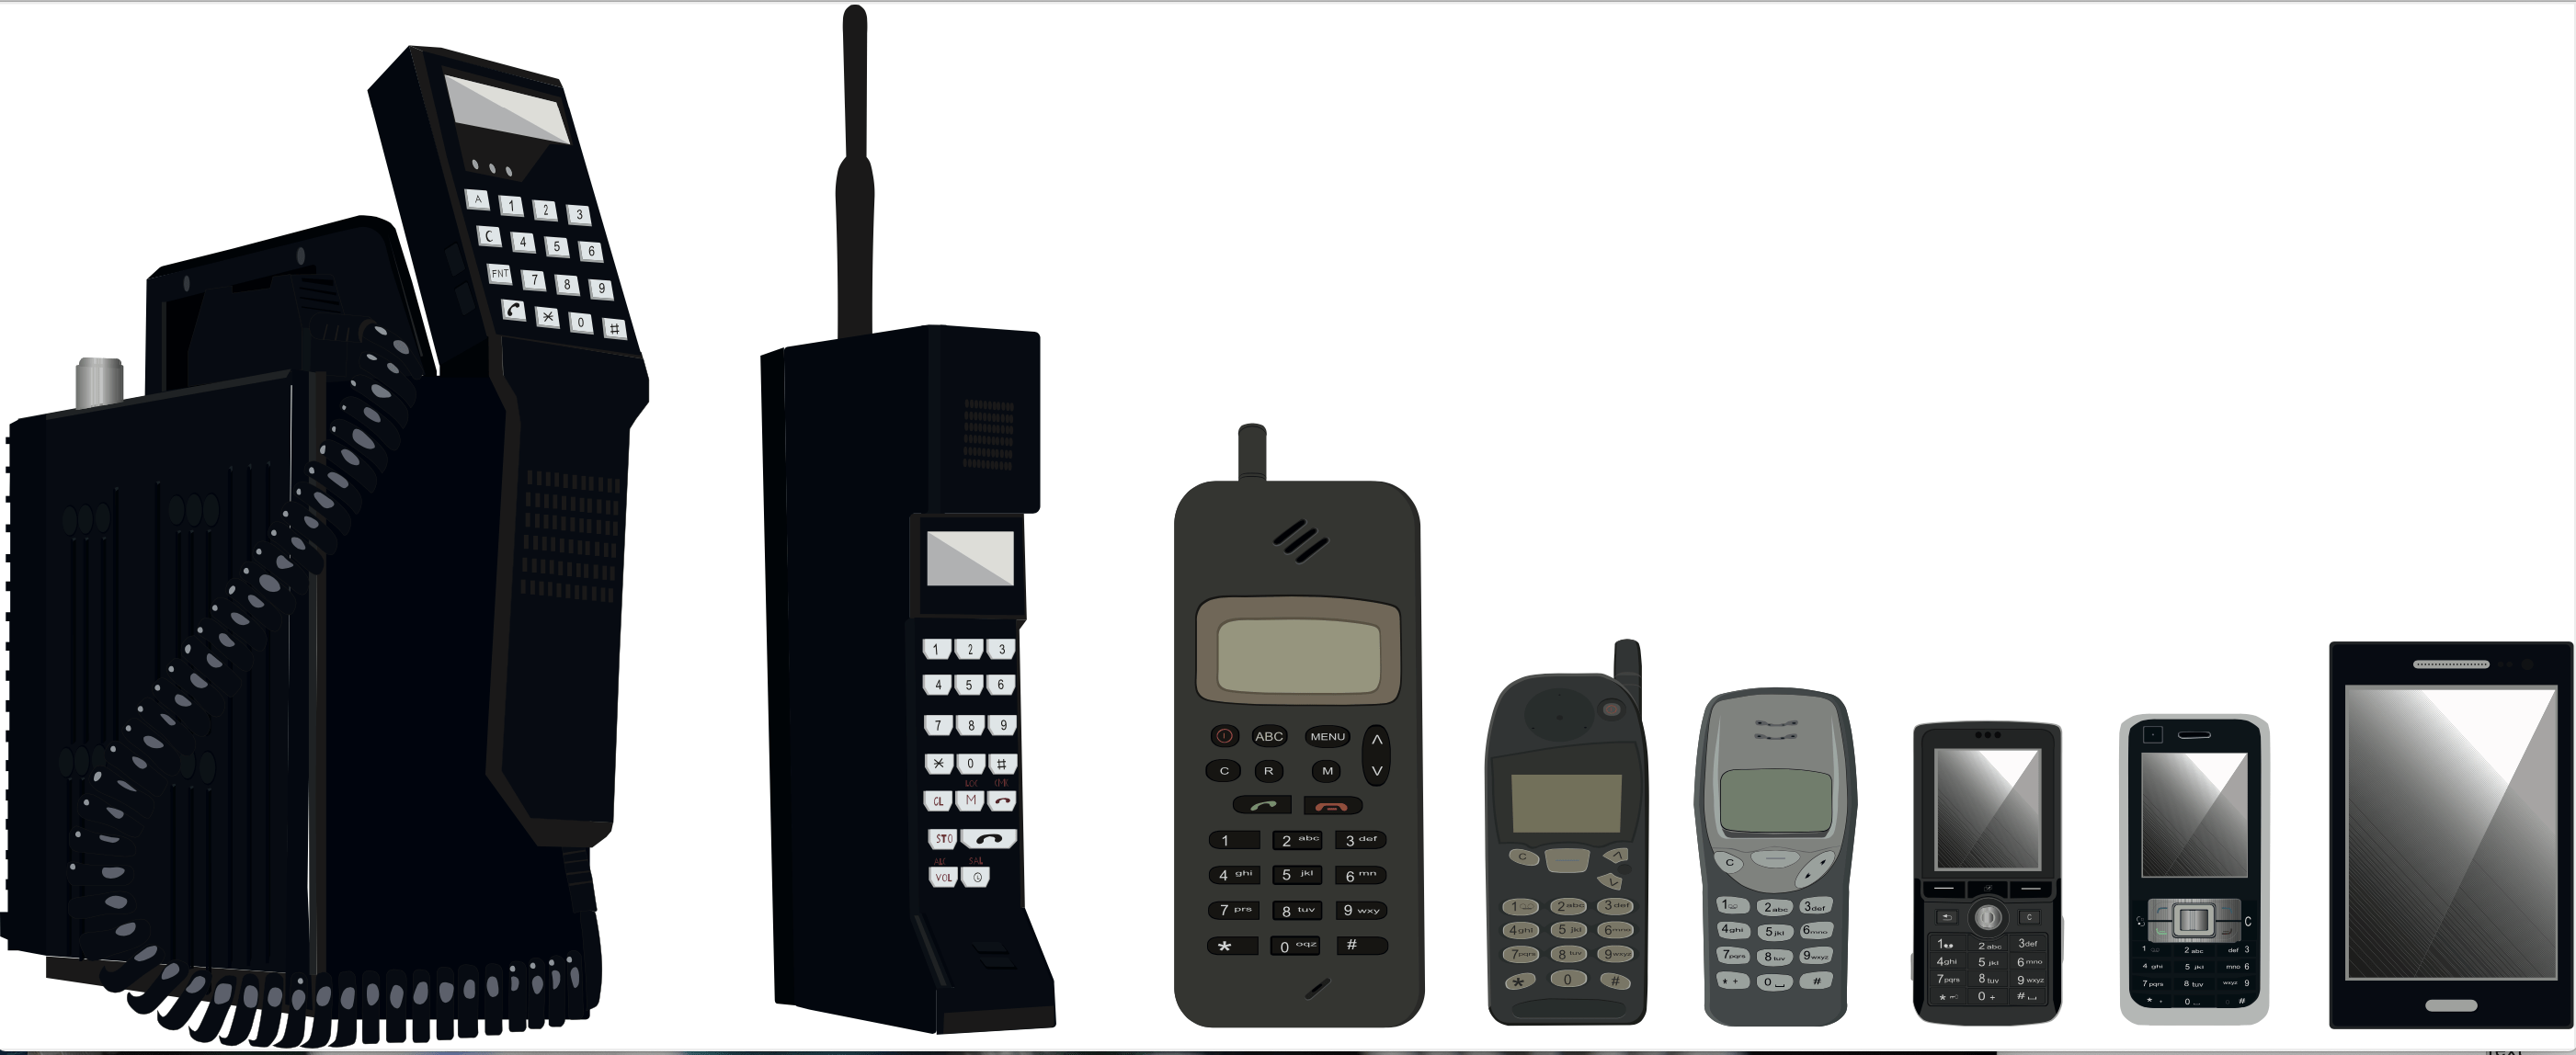 How Mobile Phones Were A Game-Changer For Businesses